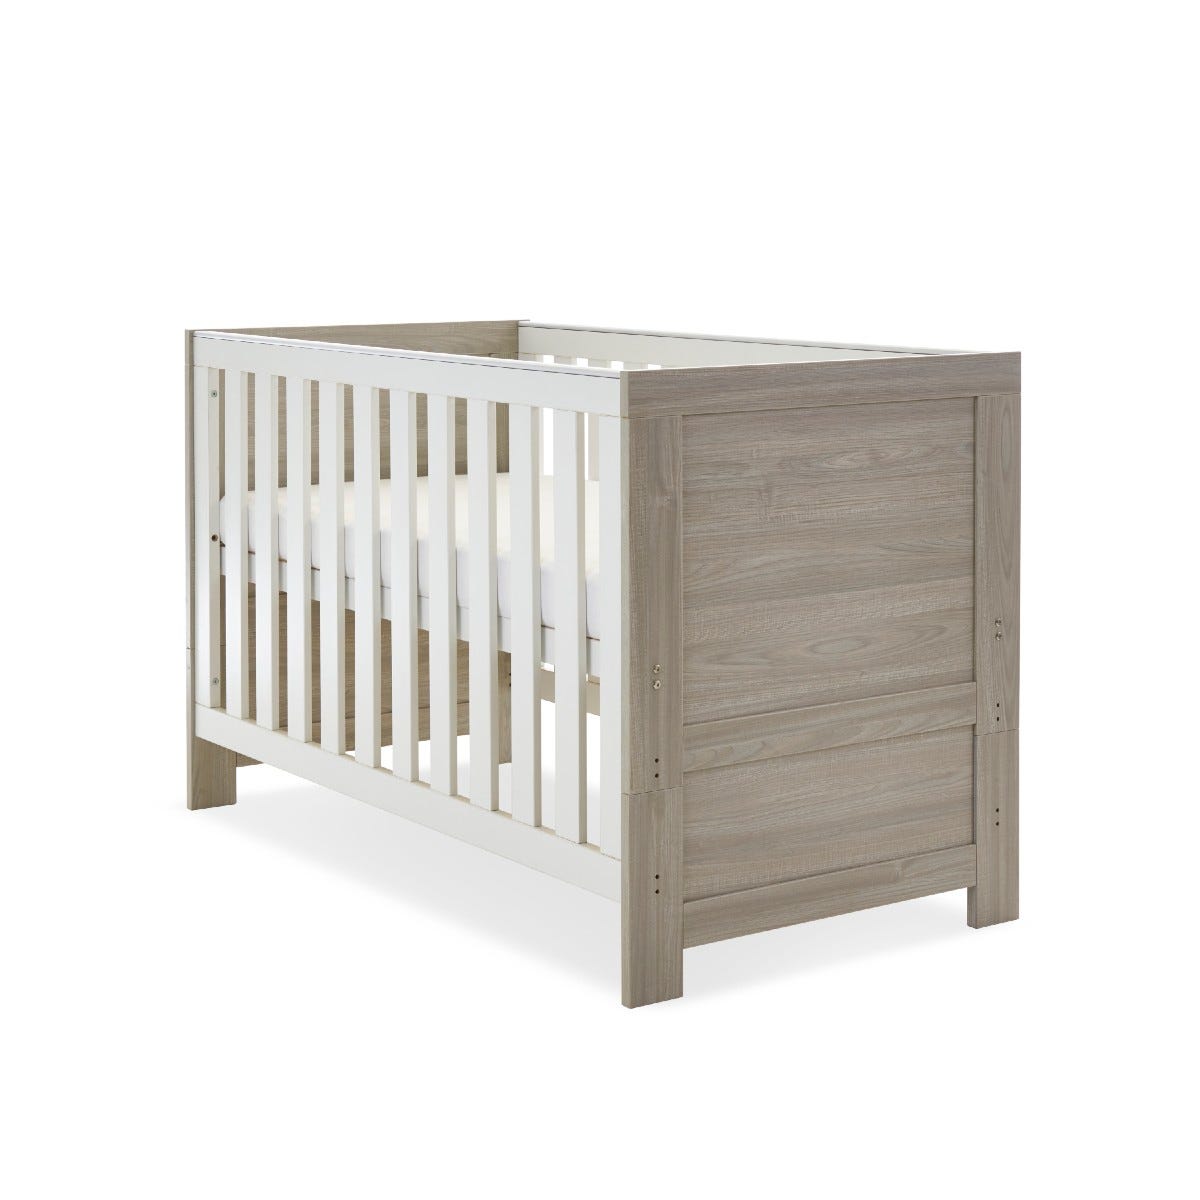 Obaby Nika Cot Bed Grey Wash and White